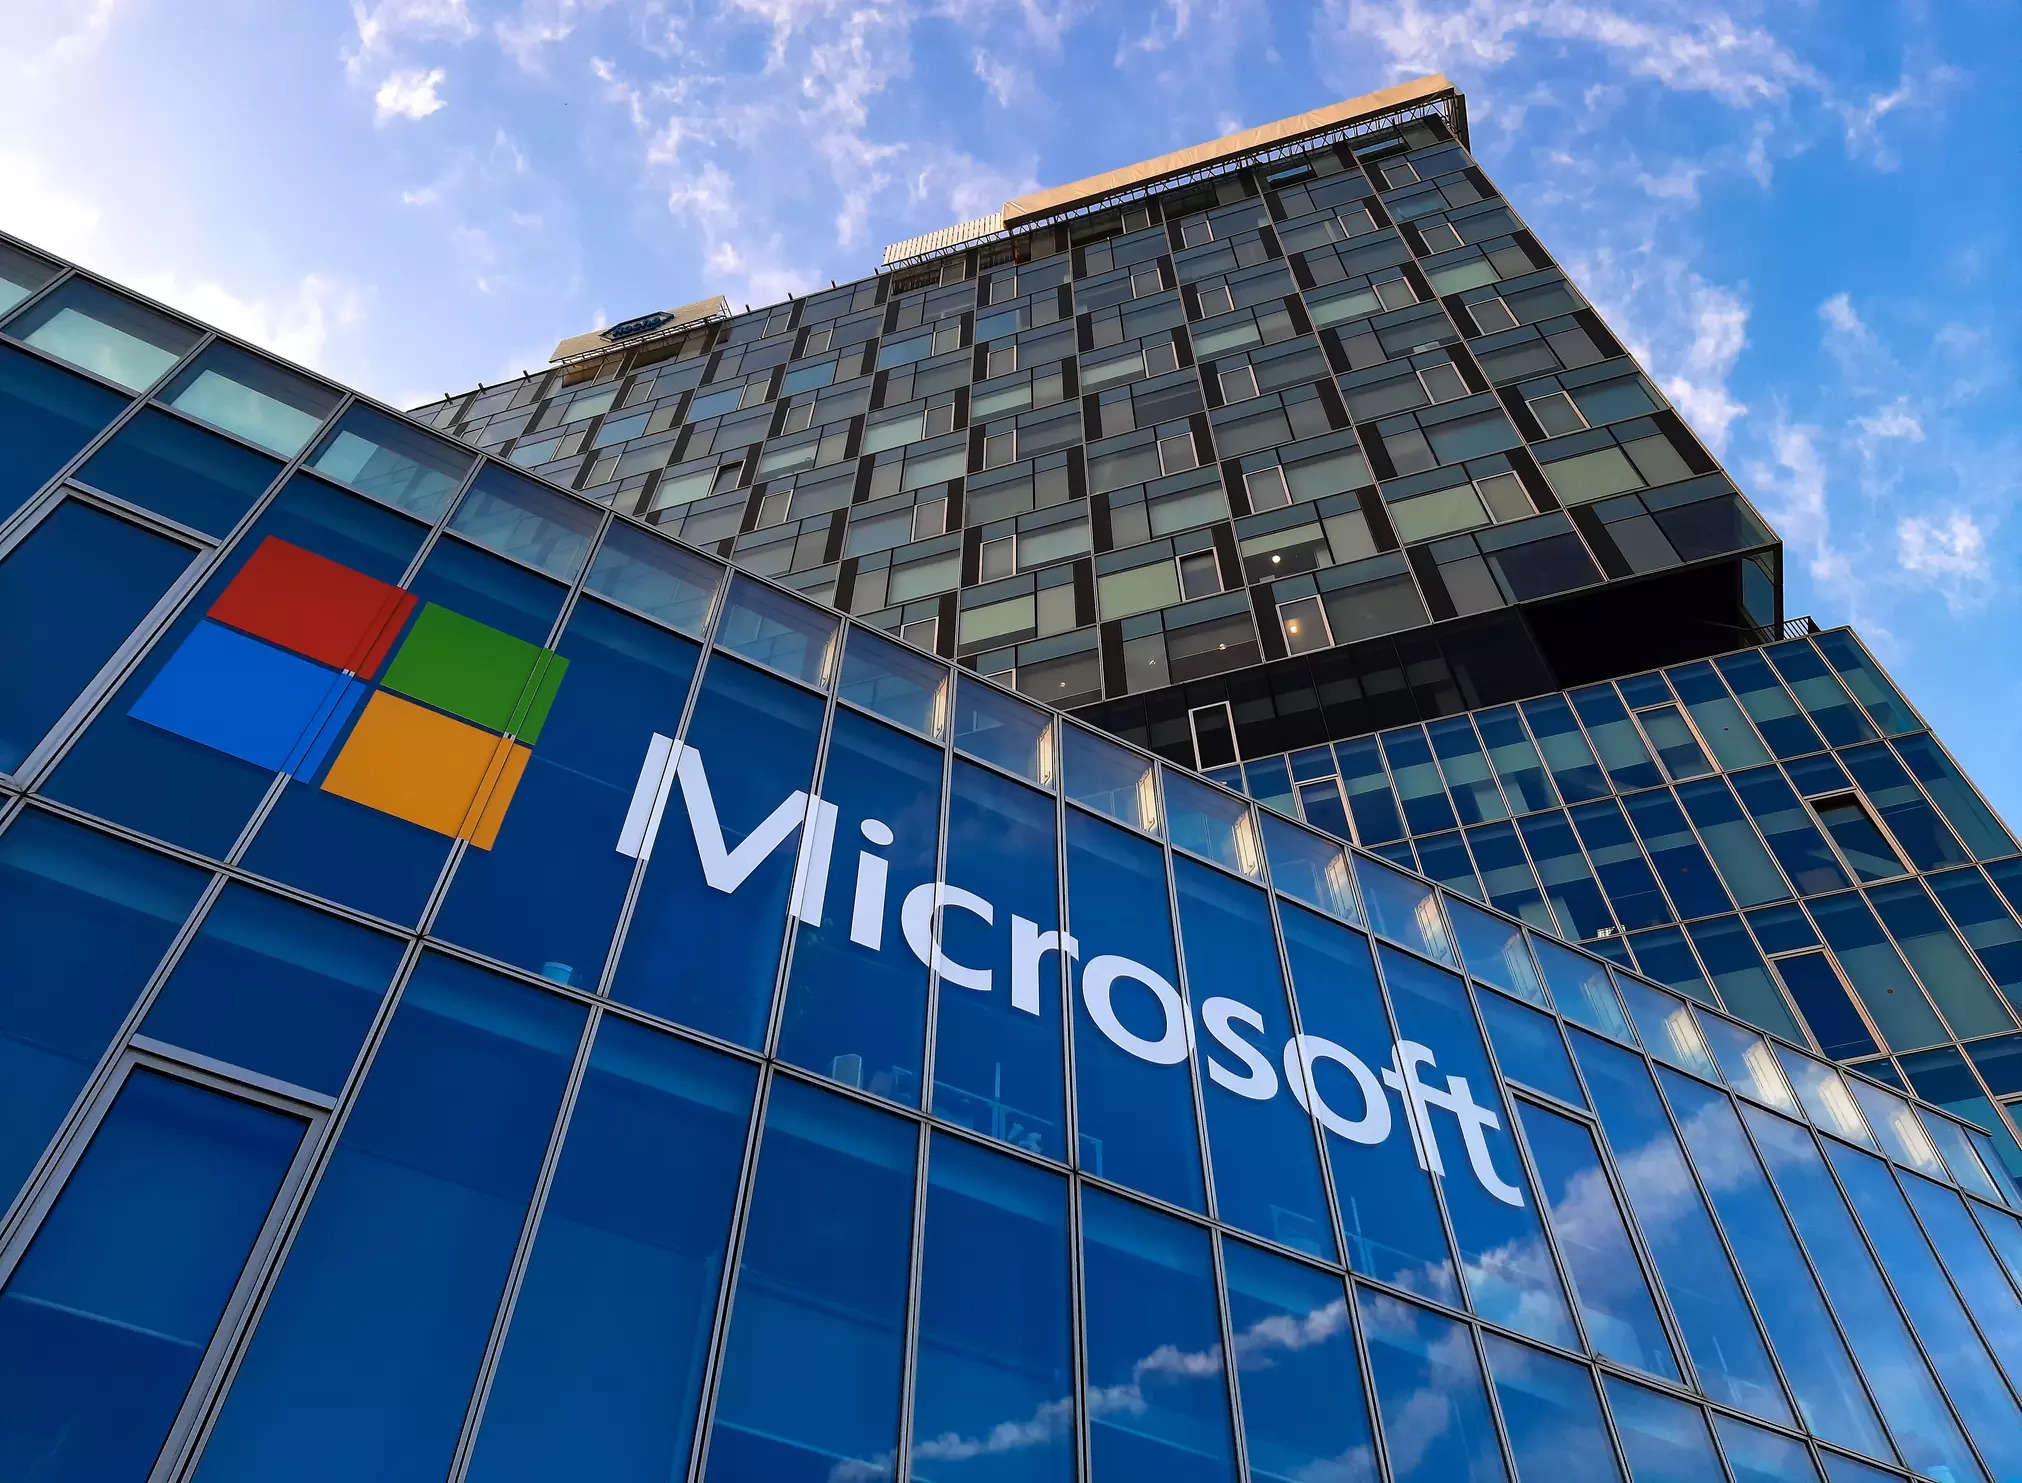  Microsoft plans to invest over $10 million in a financing round that values Gatik at more than $700 million.